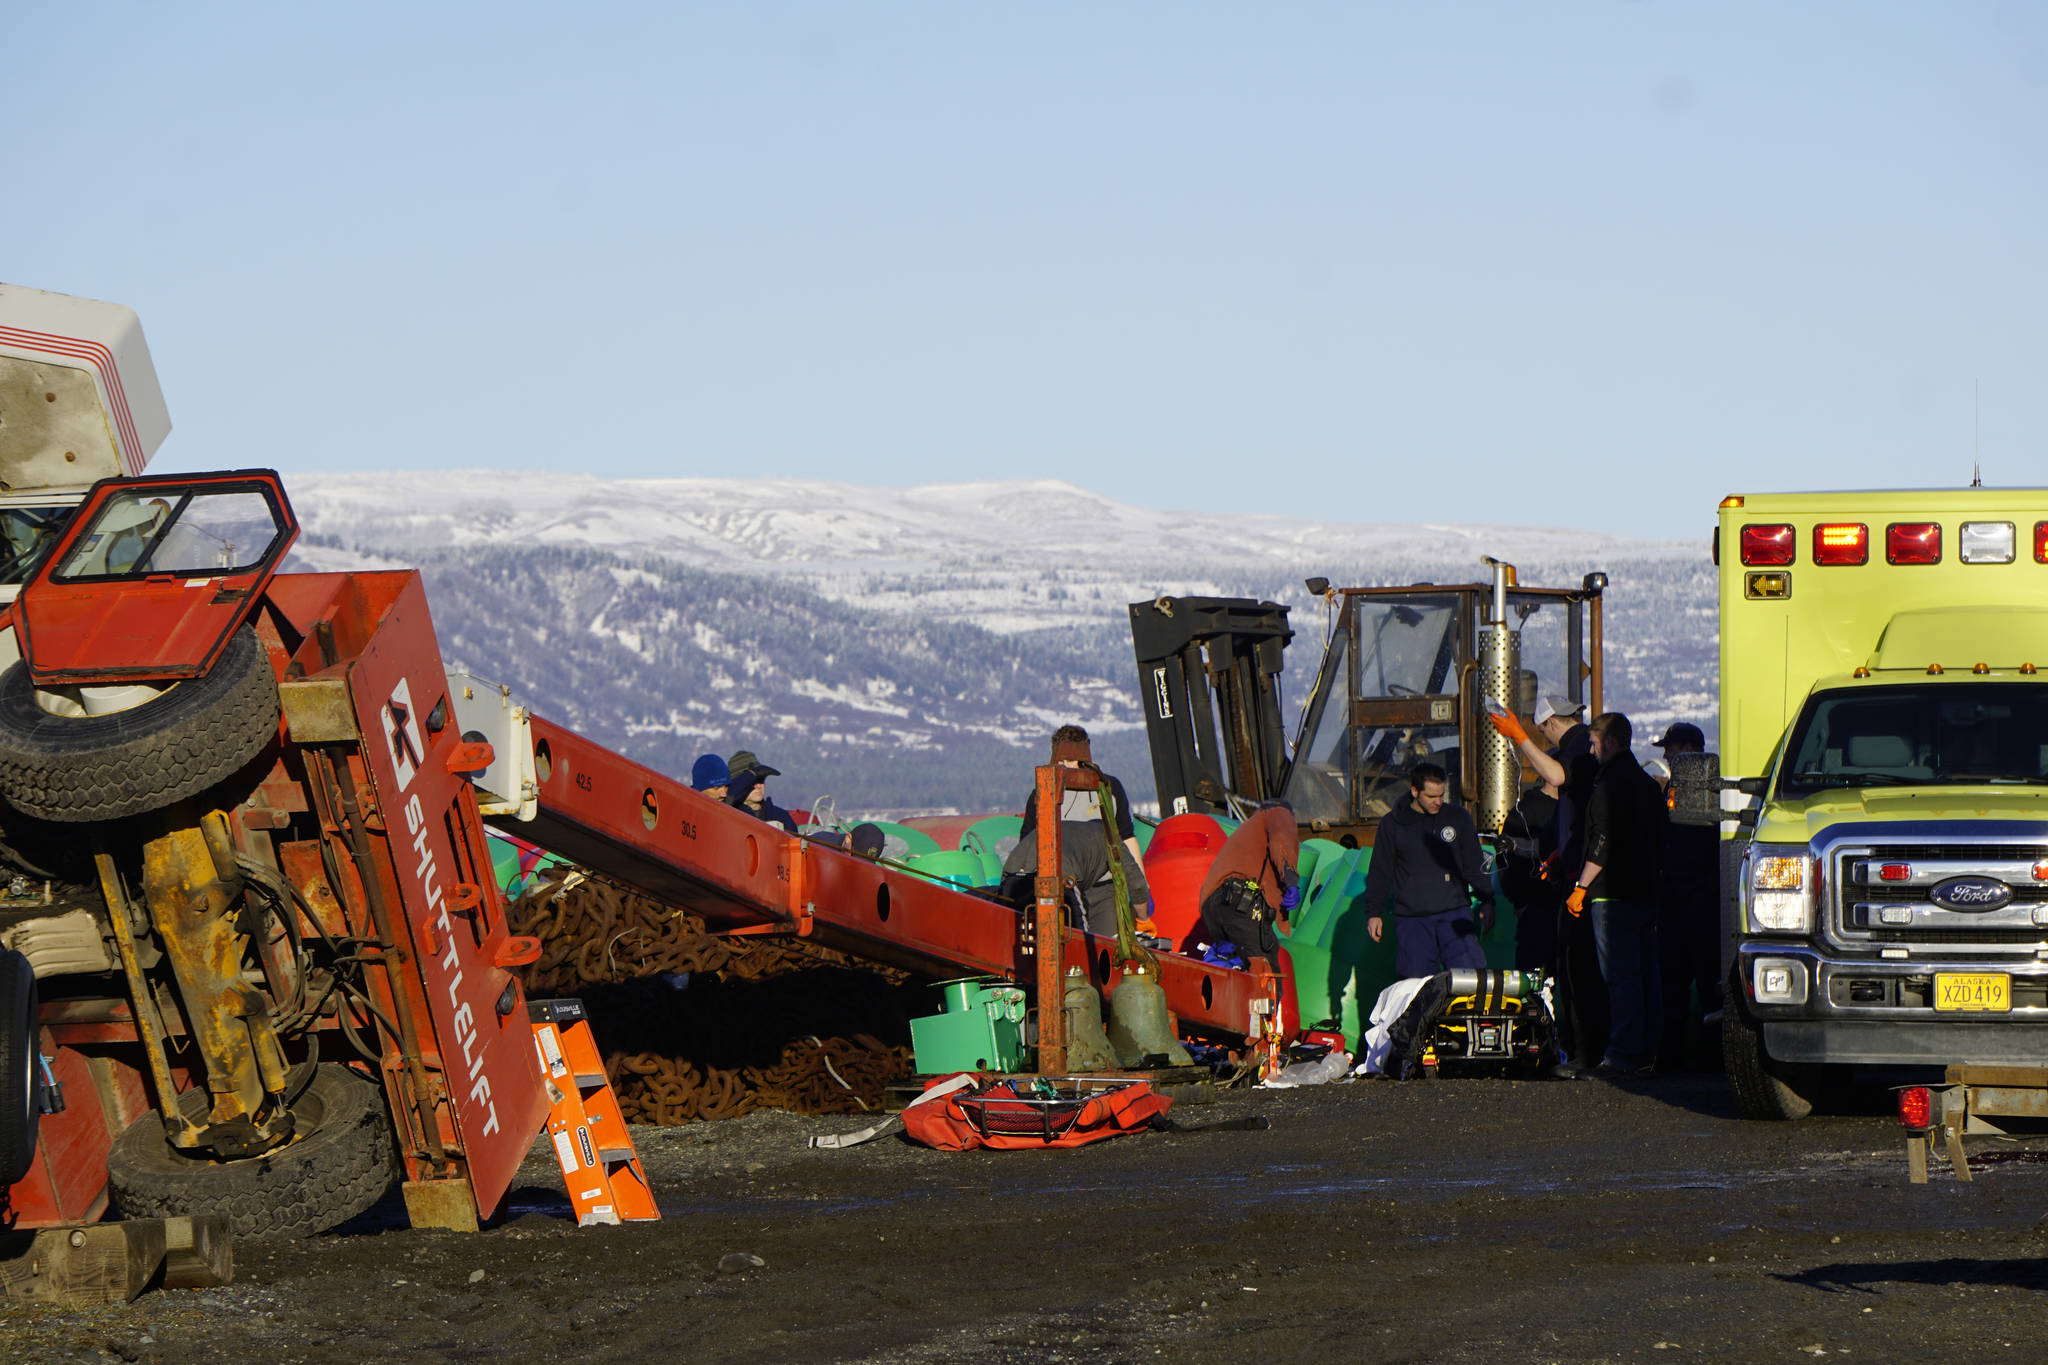 Homer Volunteer Fire Department emergency medical technicians treat a person injured when a crane tipped over at the Pioneer Dock on the Homer Spit at about 1:55 p.m. Jan. 31, 2019, in Homer, Alaska. (Photo by Michael Armstrong/Homer News.)